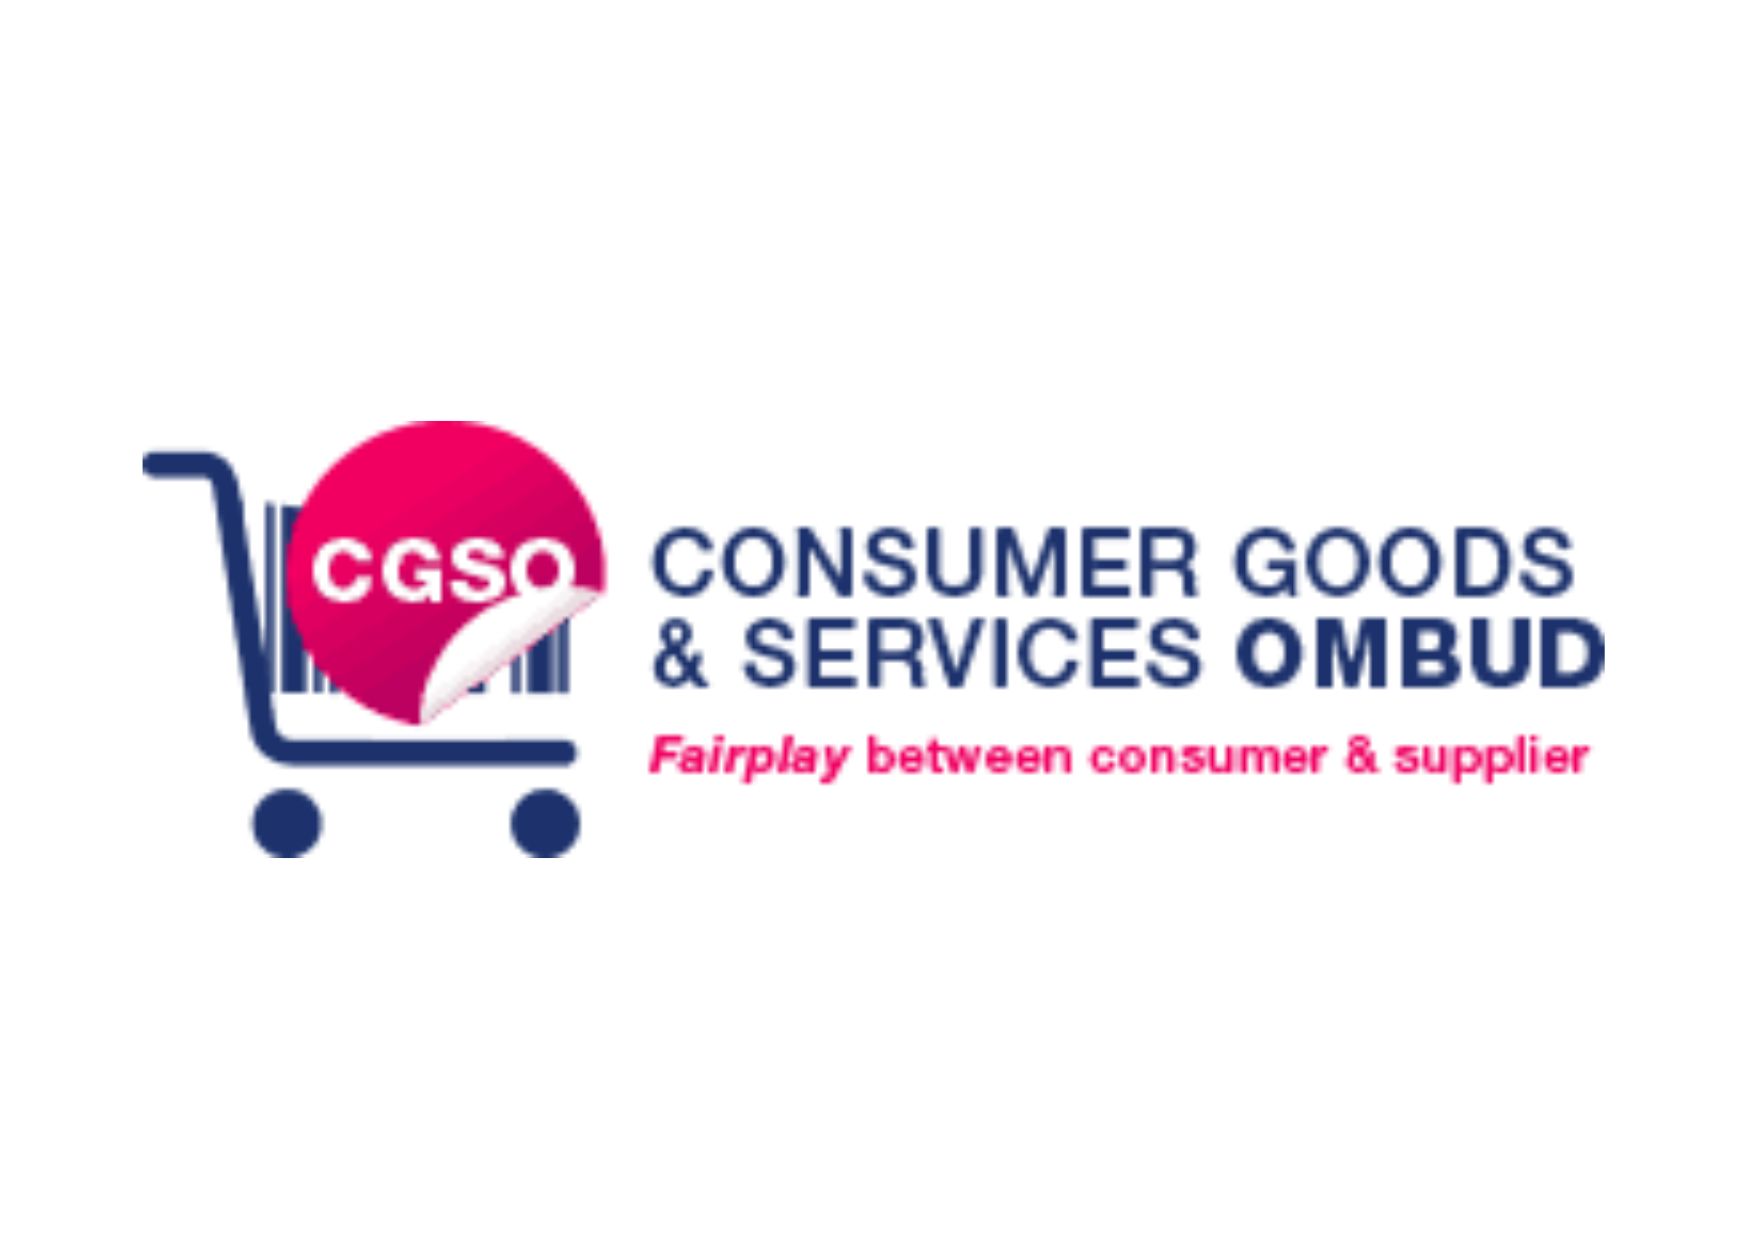 Consumer Goods and Services Ombud scheme (CGSO) Logo